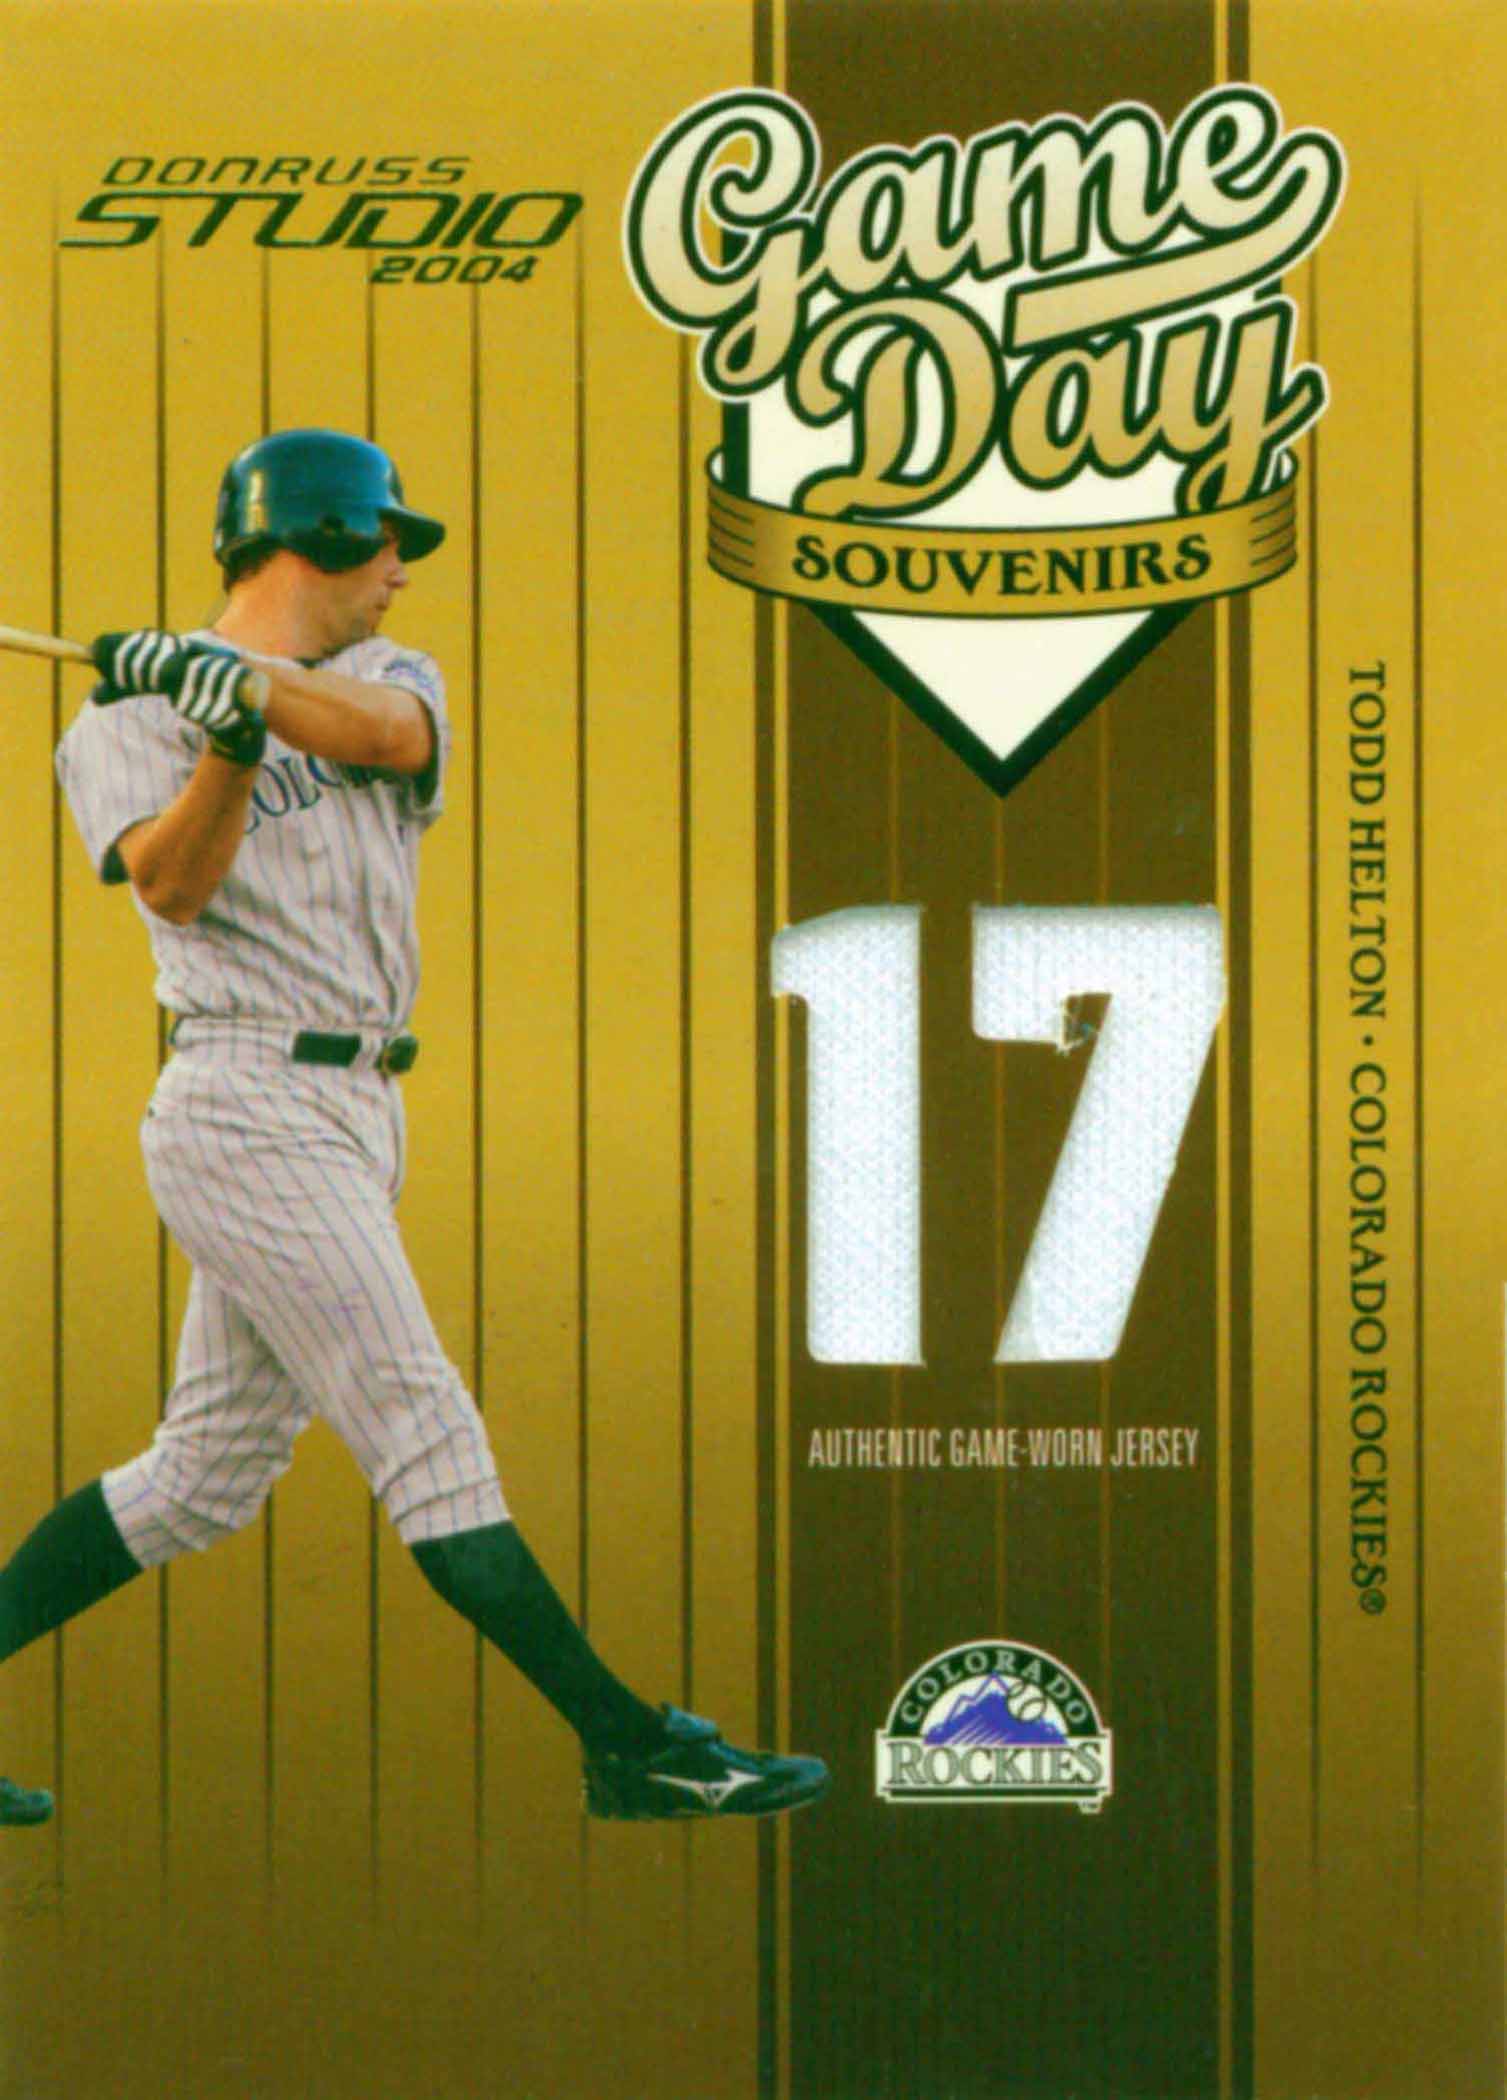 2004 Studio Game Day Souvenirs Number Jersey